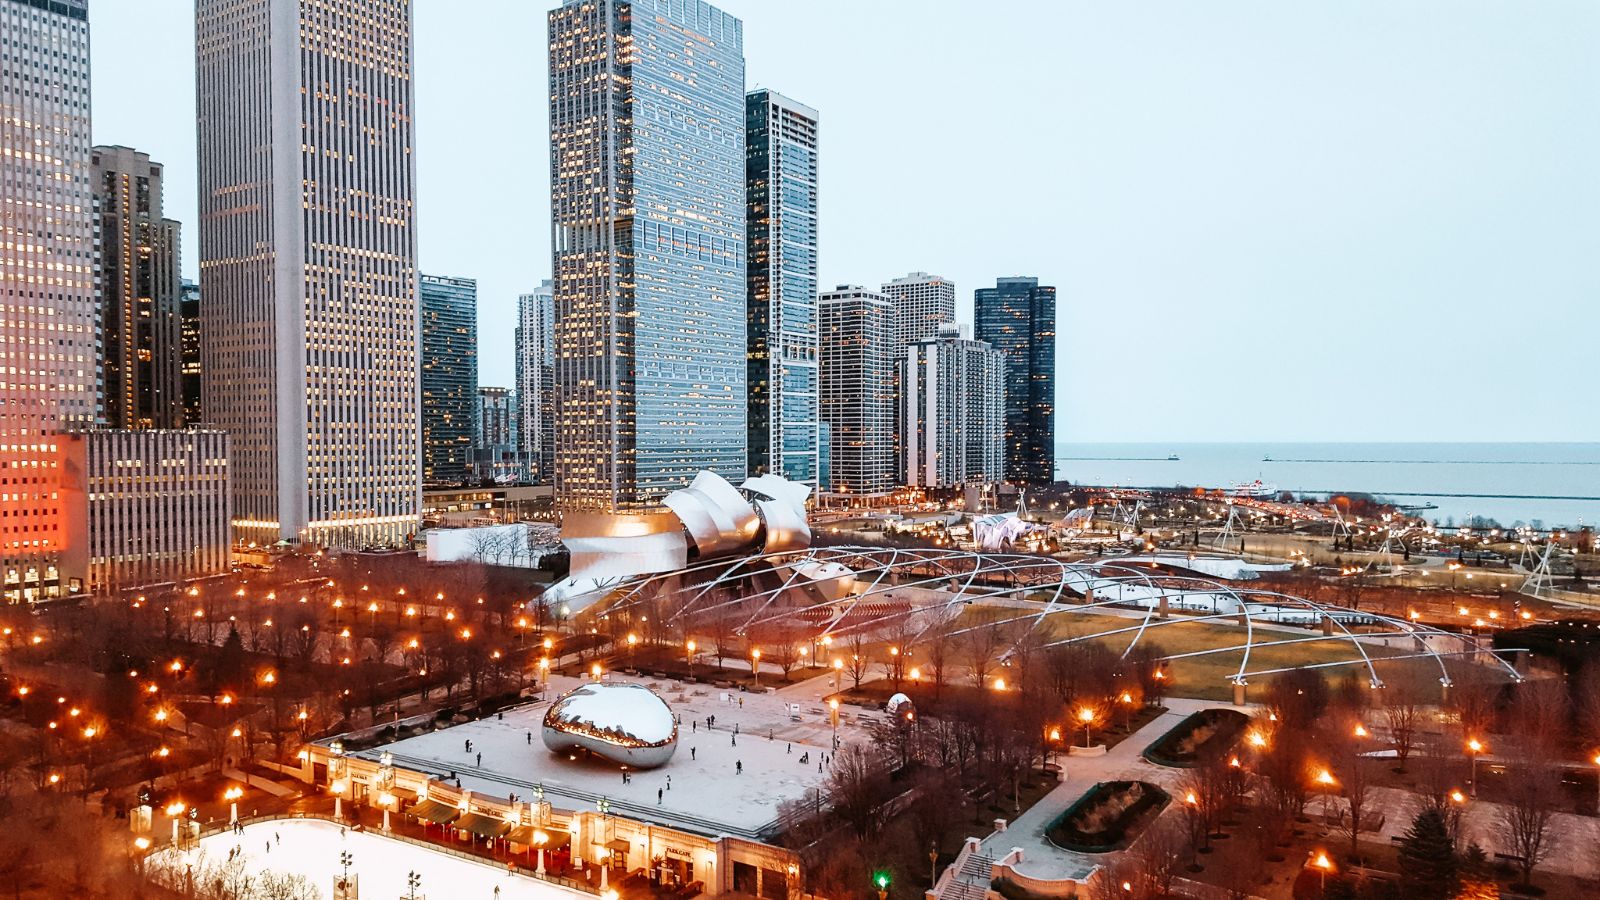 Most-Instagrammable-Spots_The-Bean-Chicago-Illinois